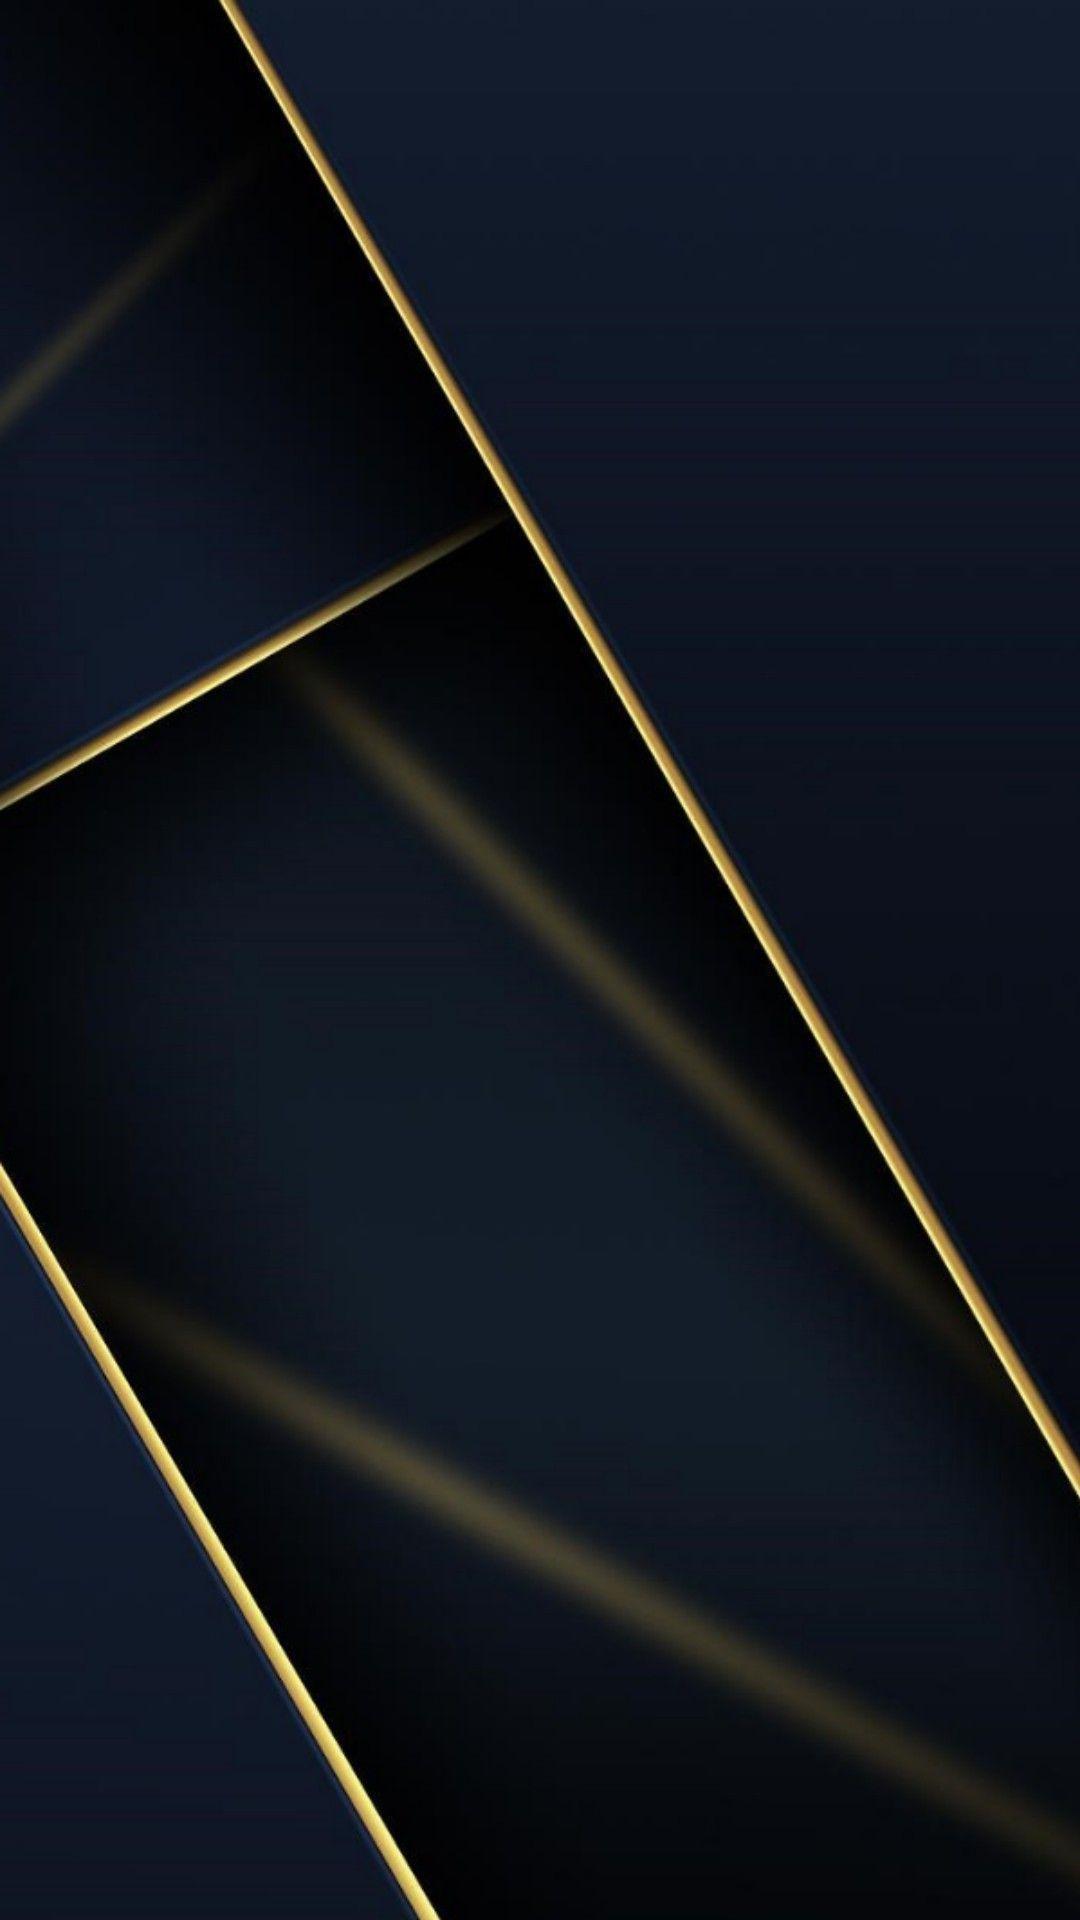 Blue and Gold Abstract Wallpapers - Top Free Blue and Gold Abstract